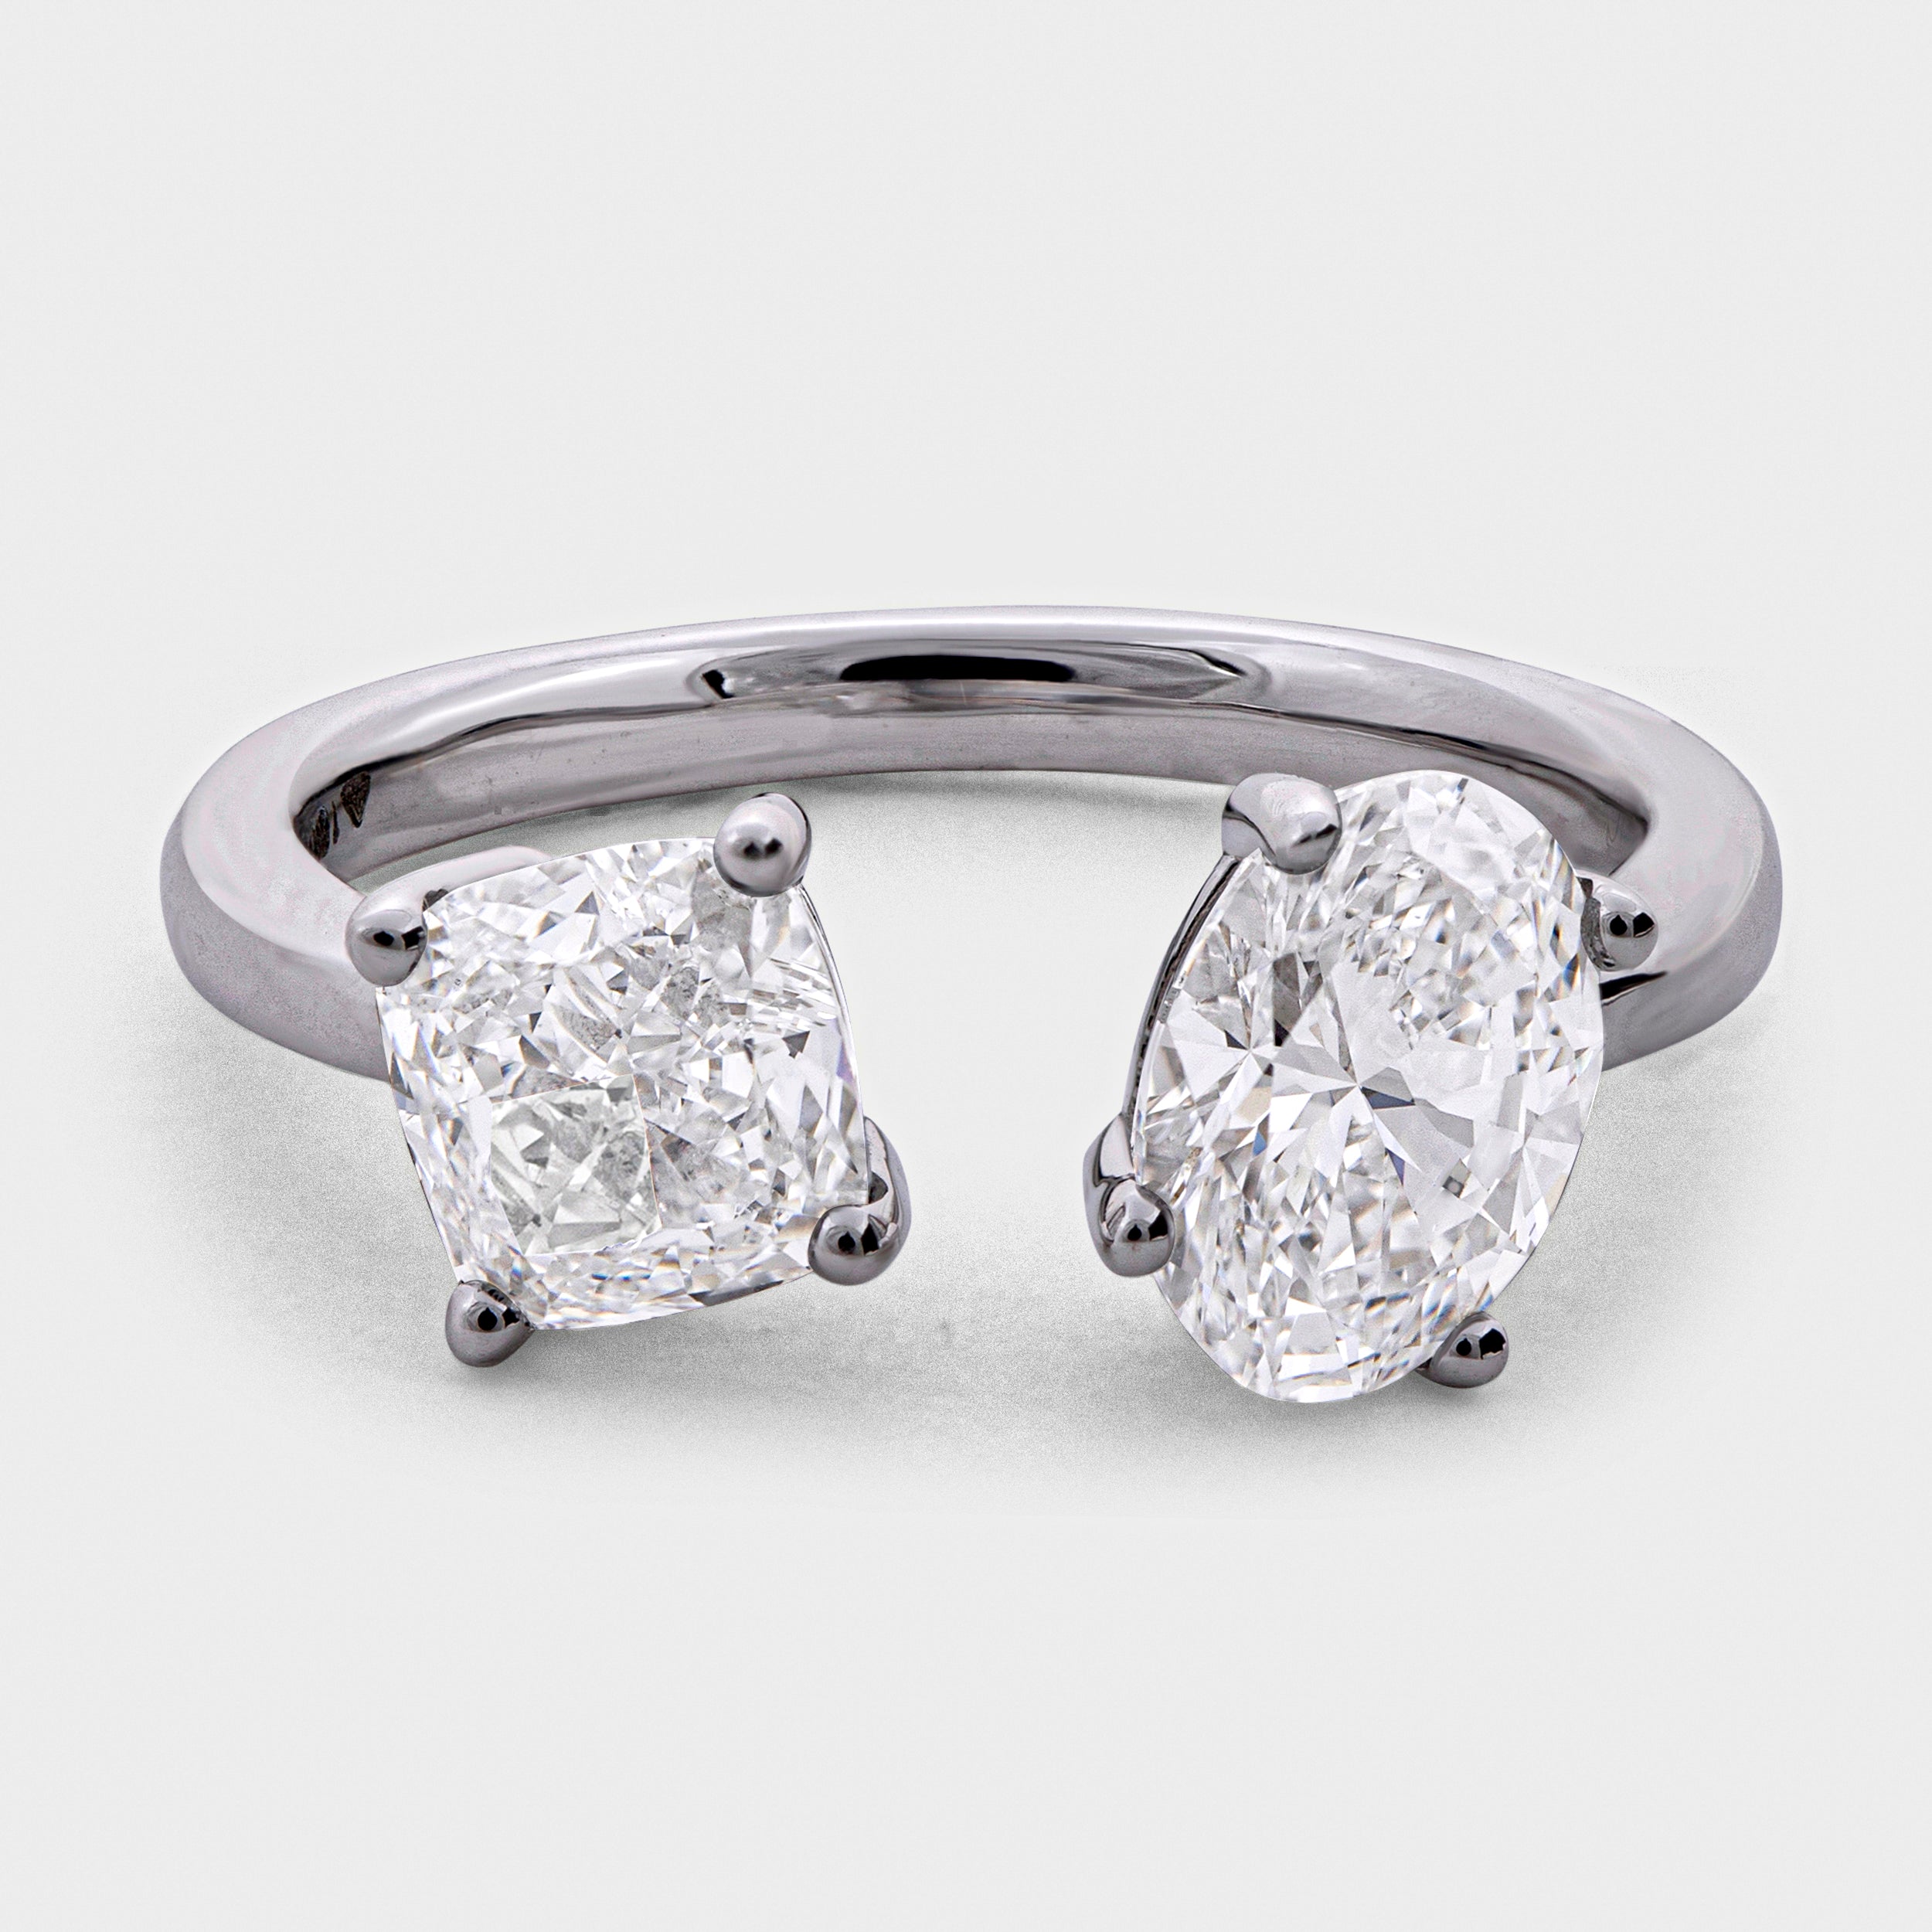 Cushion and Oval Cut 1.01 Carat & 1.00 Carat Lab-Grown Solitaire Ring | SKU : 0019997261